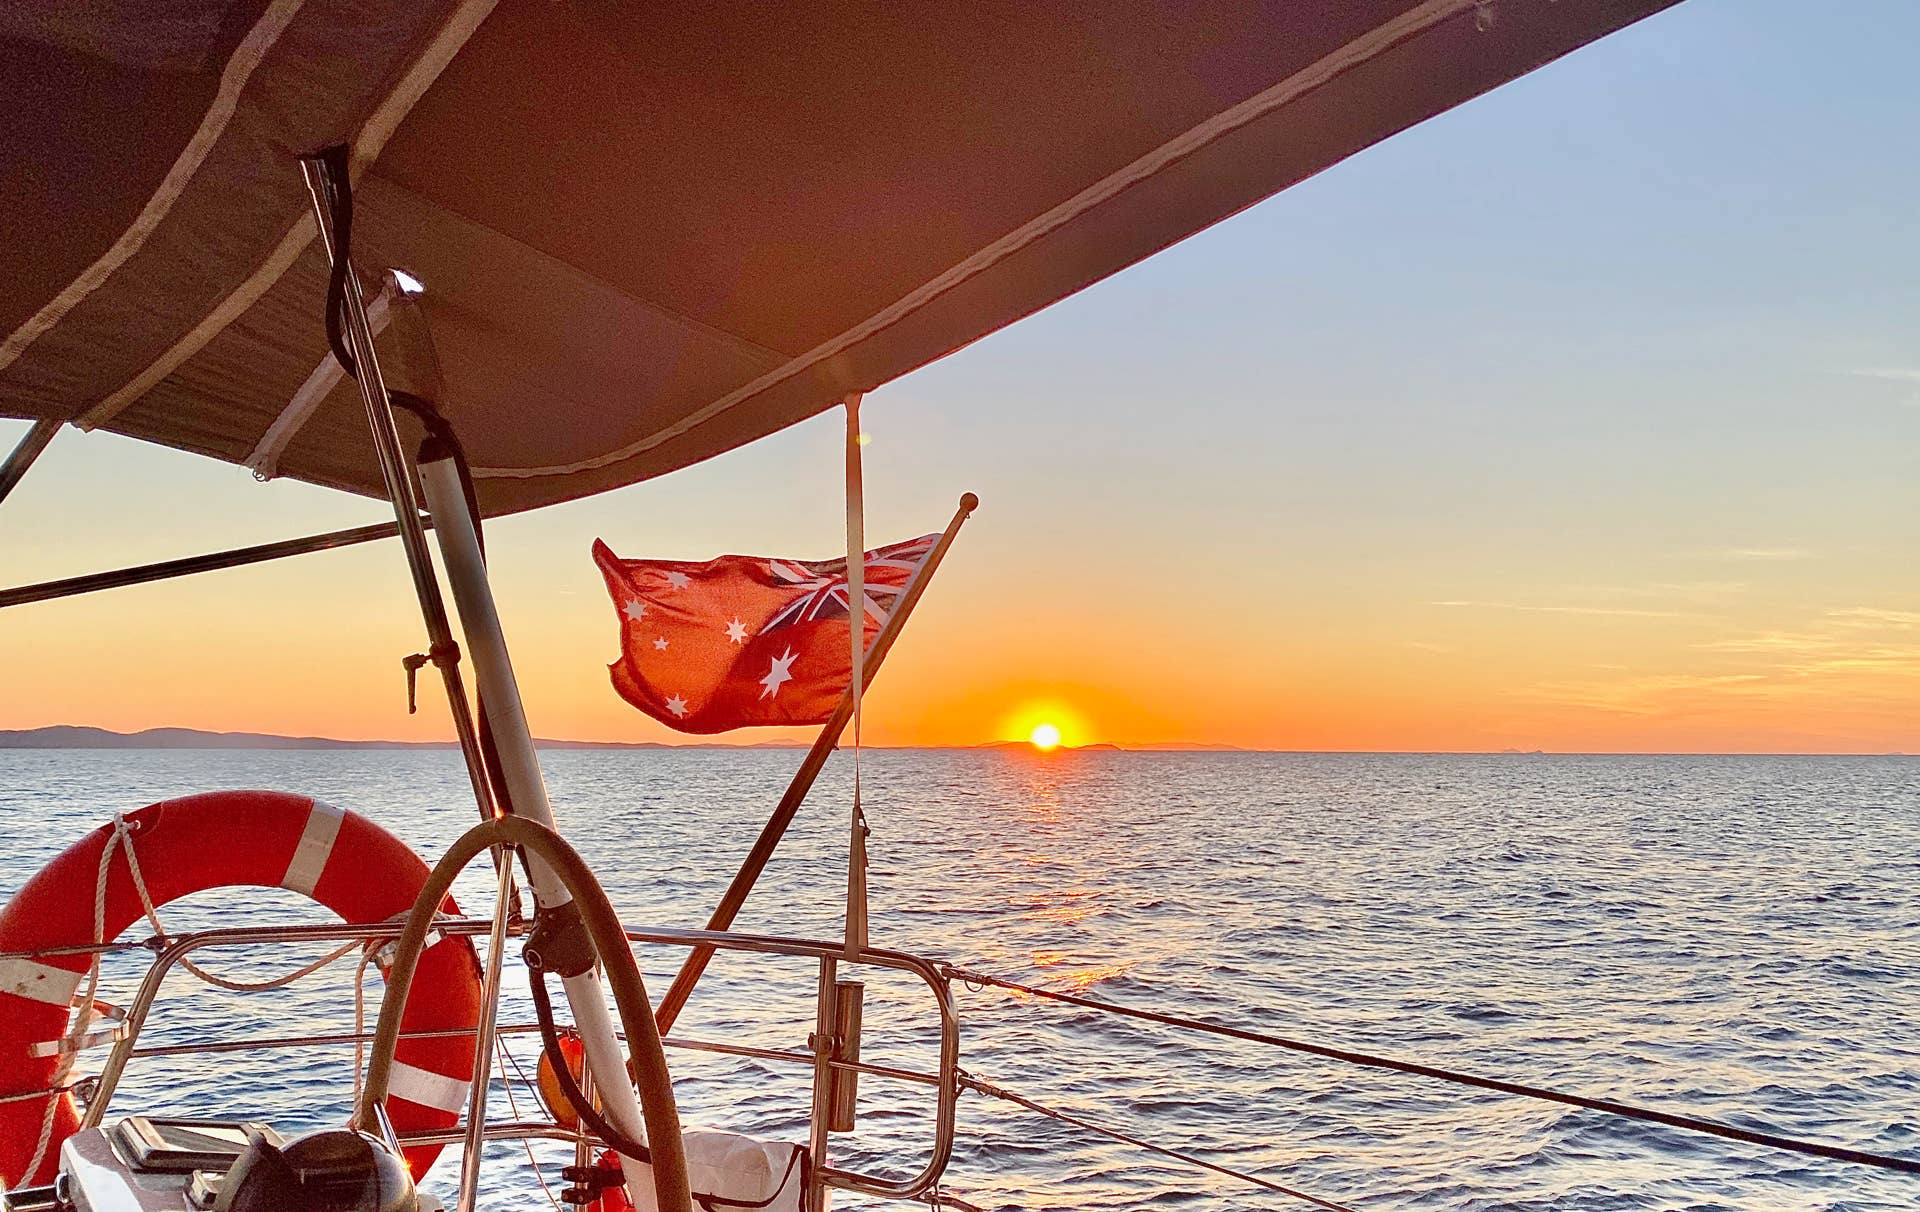 Sunset during a private spreading of the ashes ceremony on a private yaccht charter, Moreton Bay, Brisbane.